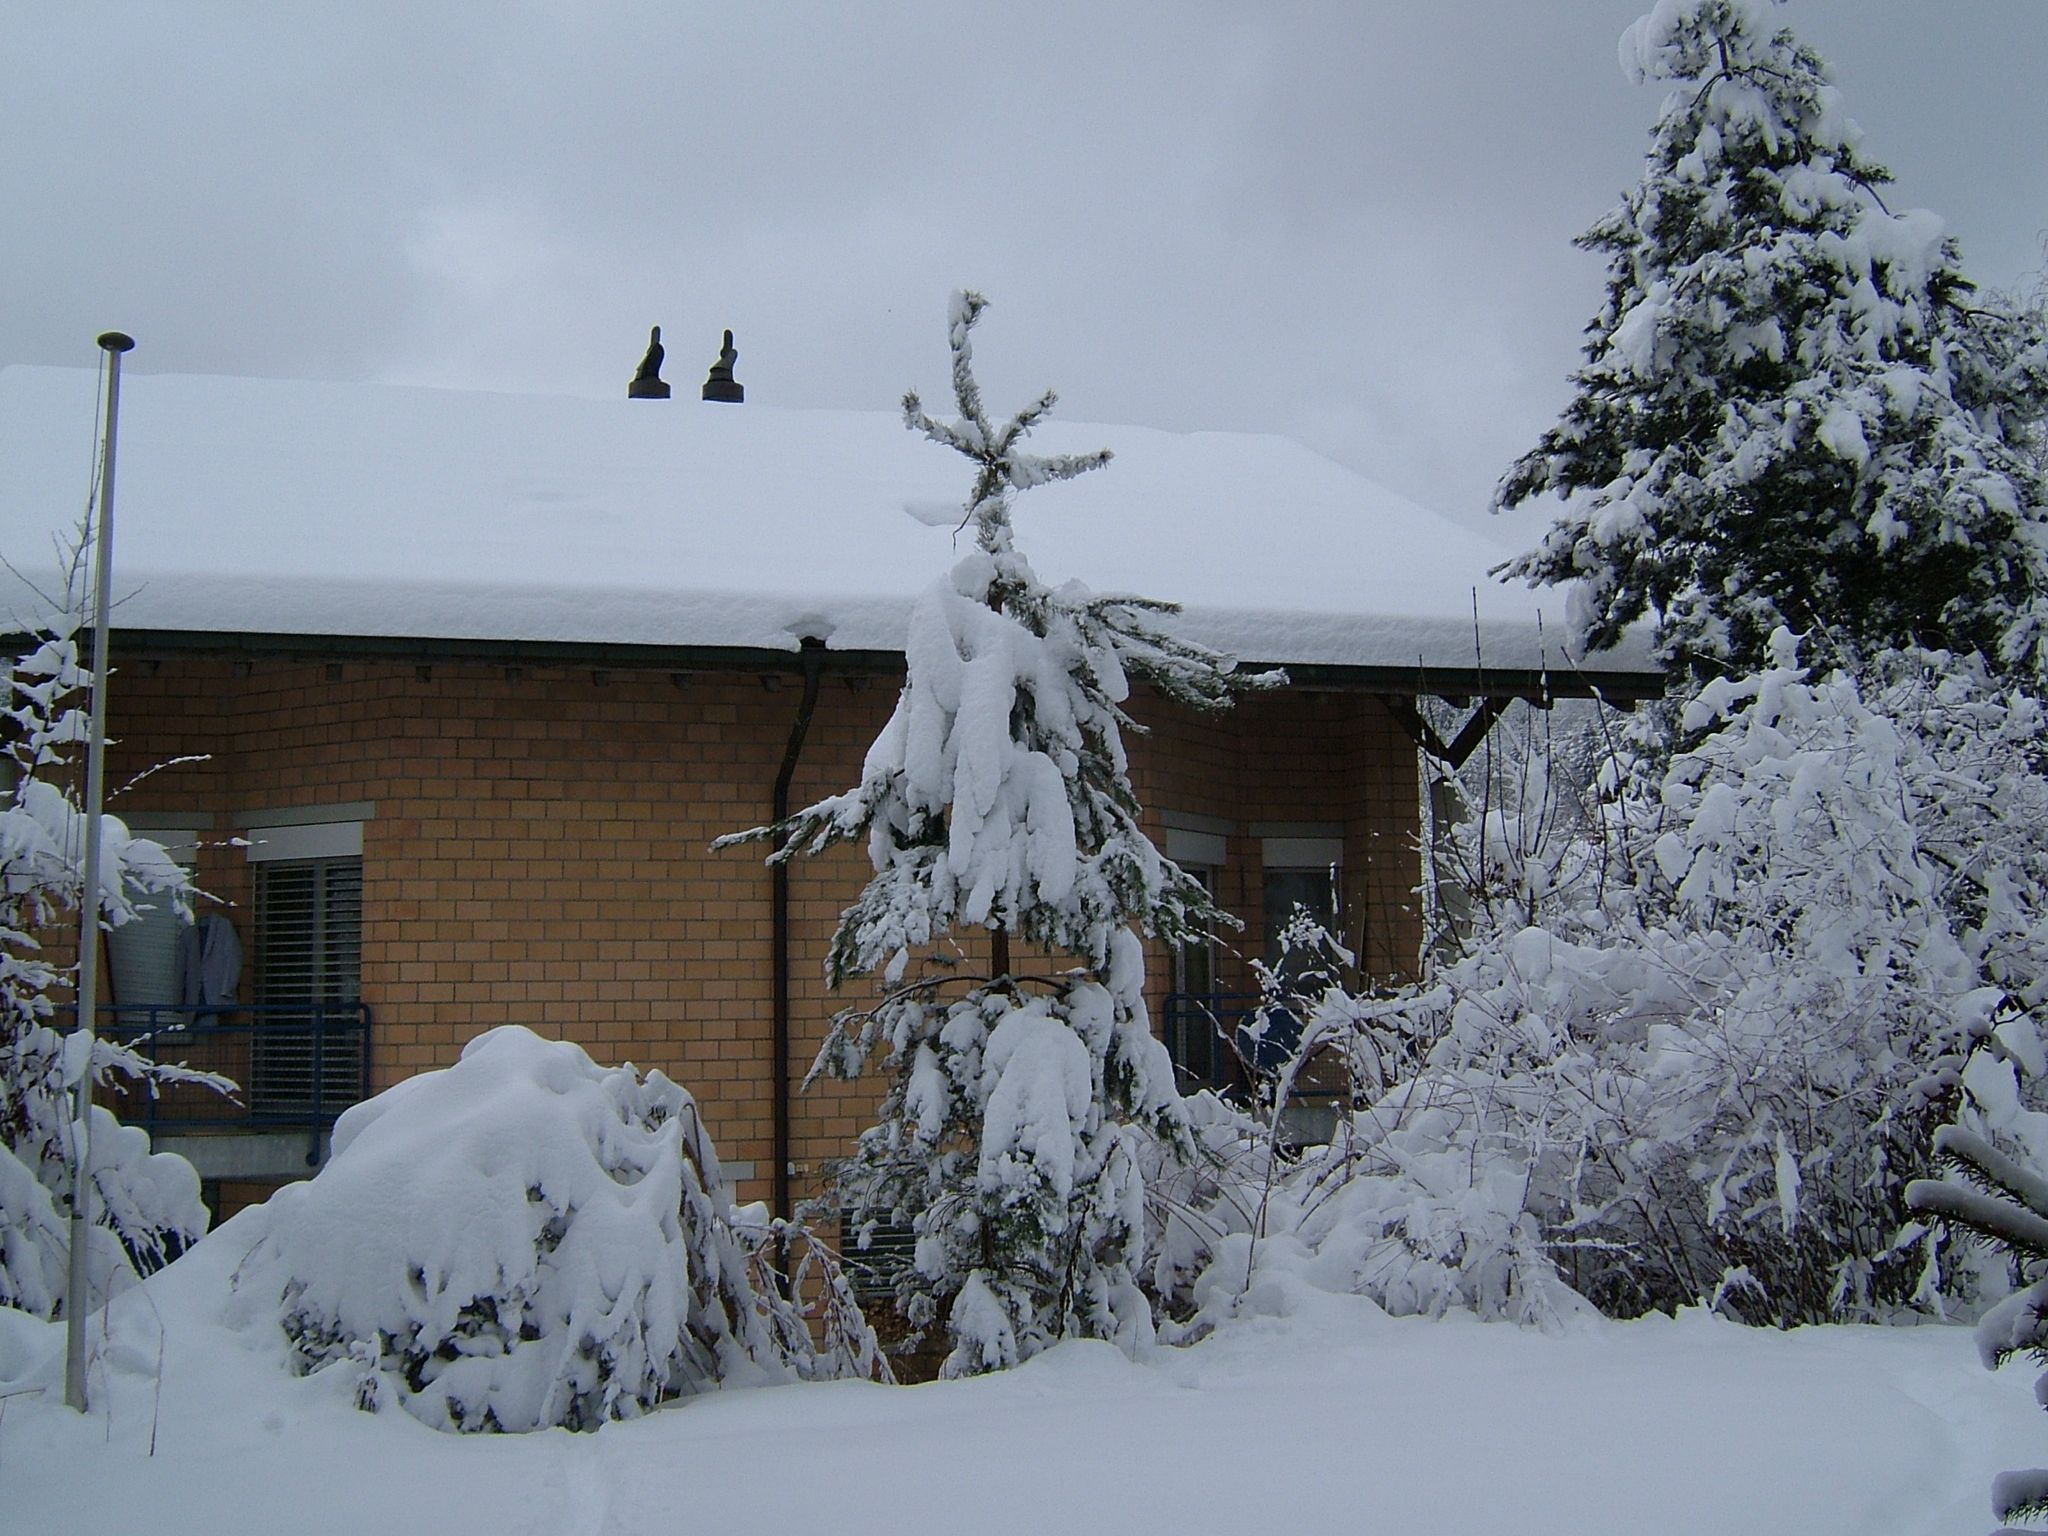 Photo 6 of 23 from the album Winter in Embrach.